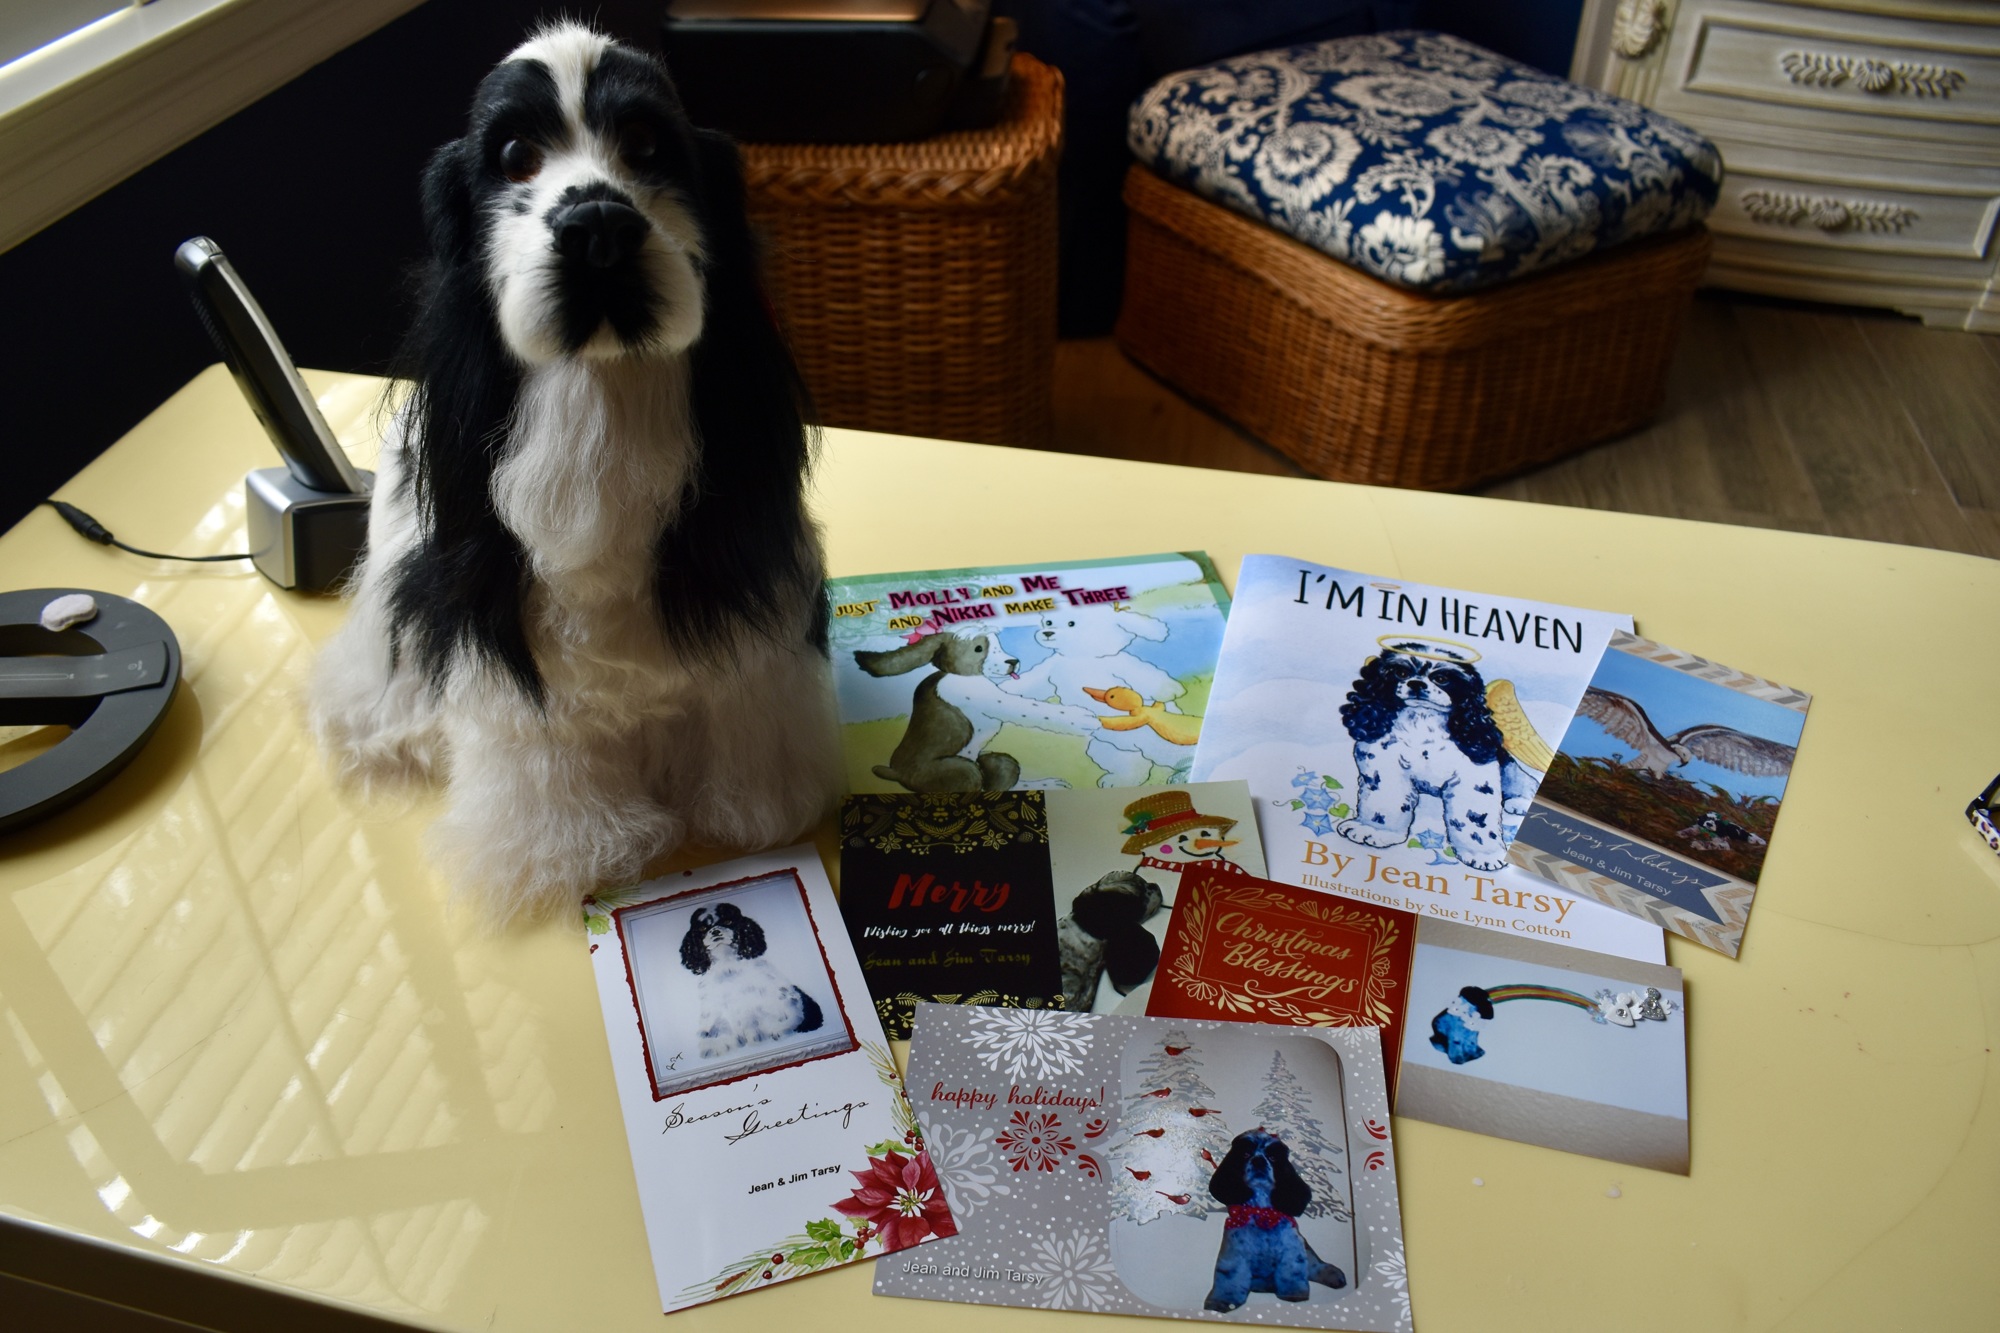 Molly was a regular on the Tarsys' Christmas cards each year. (Photo by Lesley Dwyer)